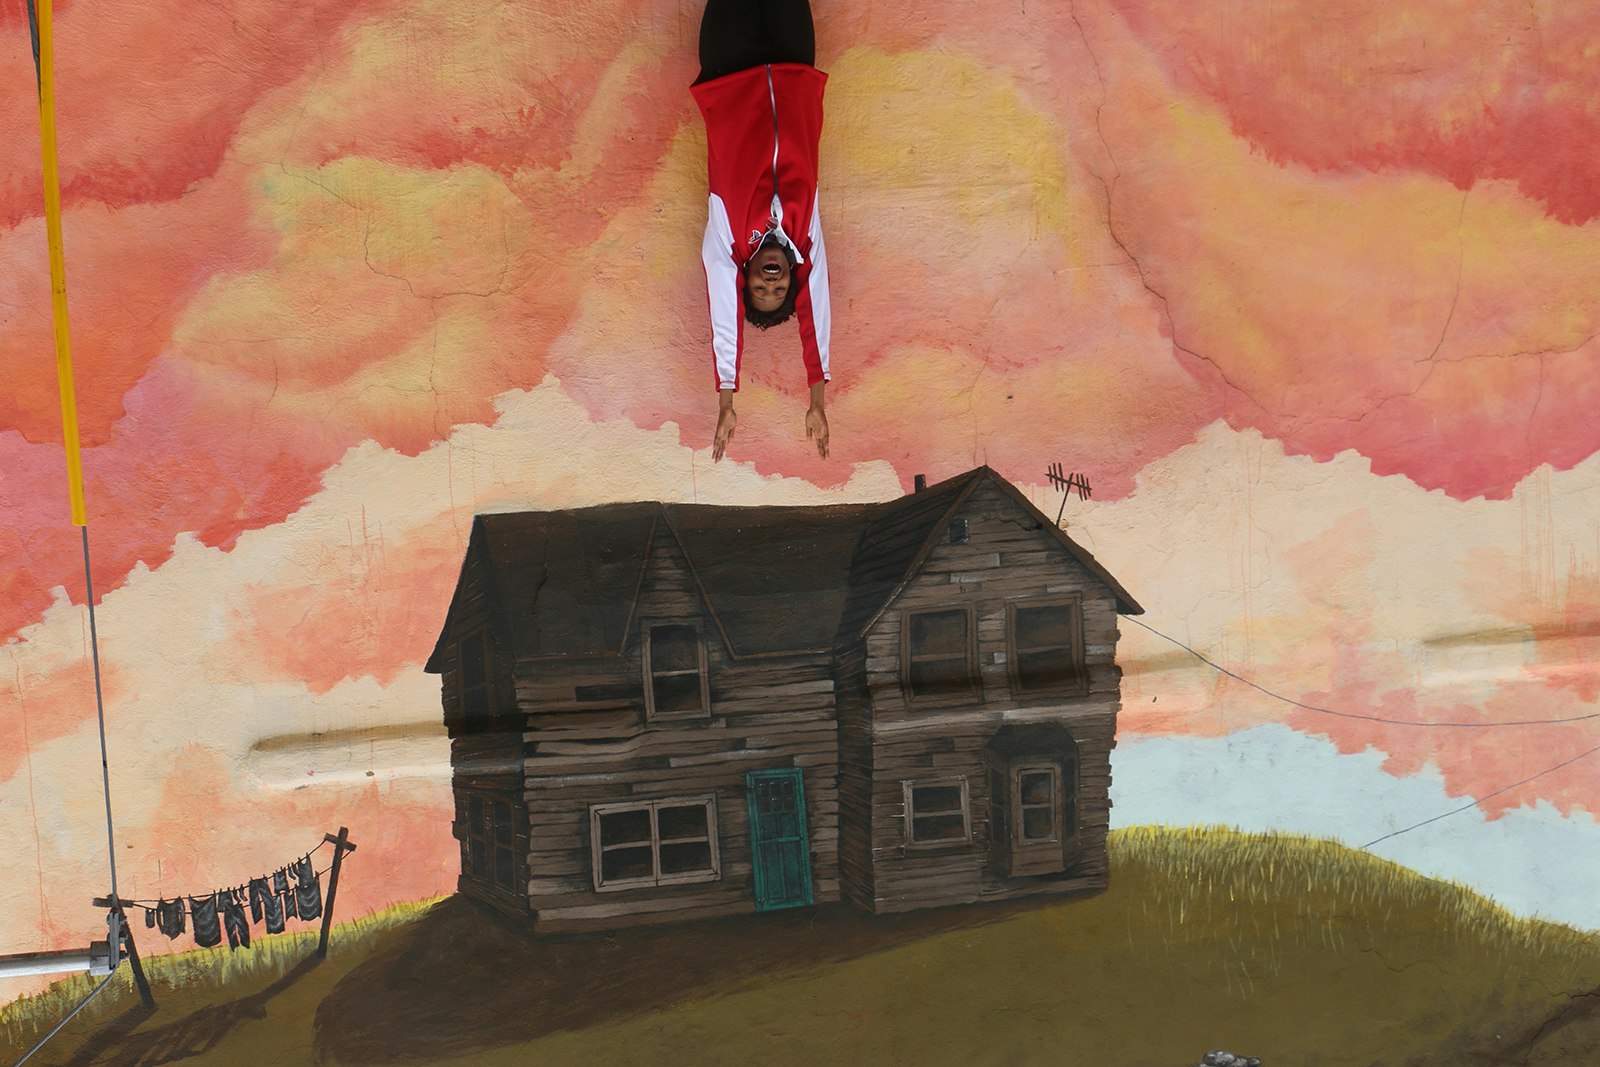  A woman appears to be upside-down over a painted house © Ni'Kesia Pannell / Lonely Planet